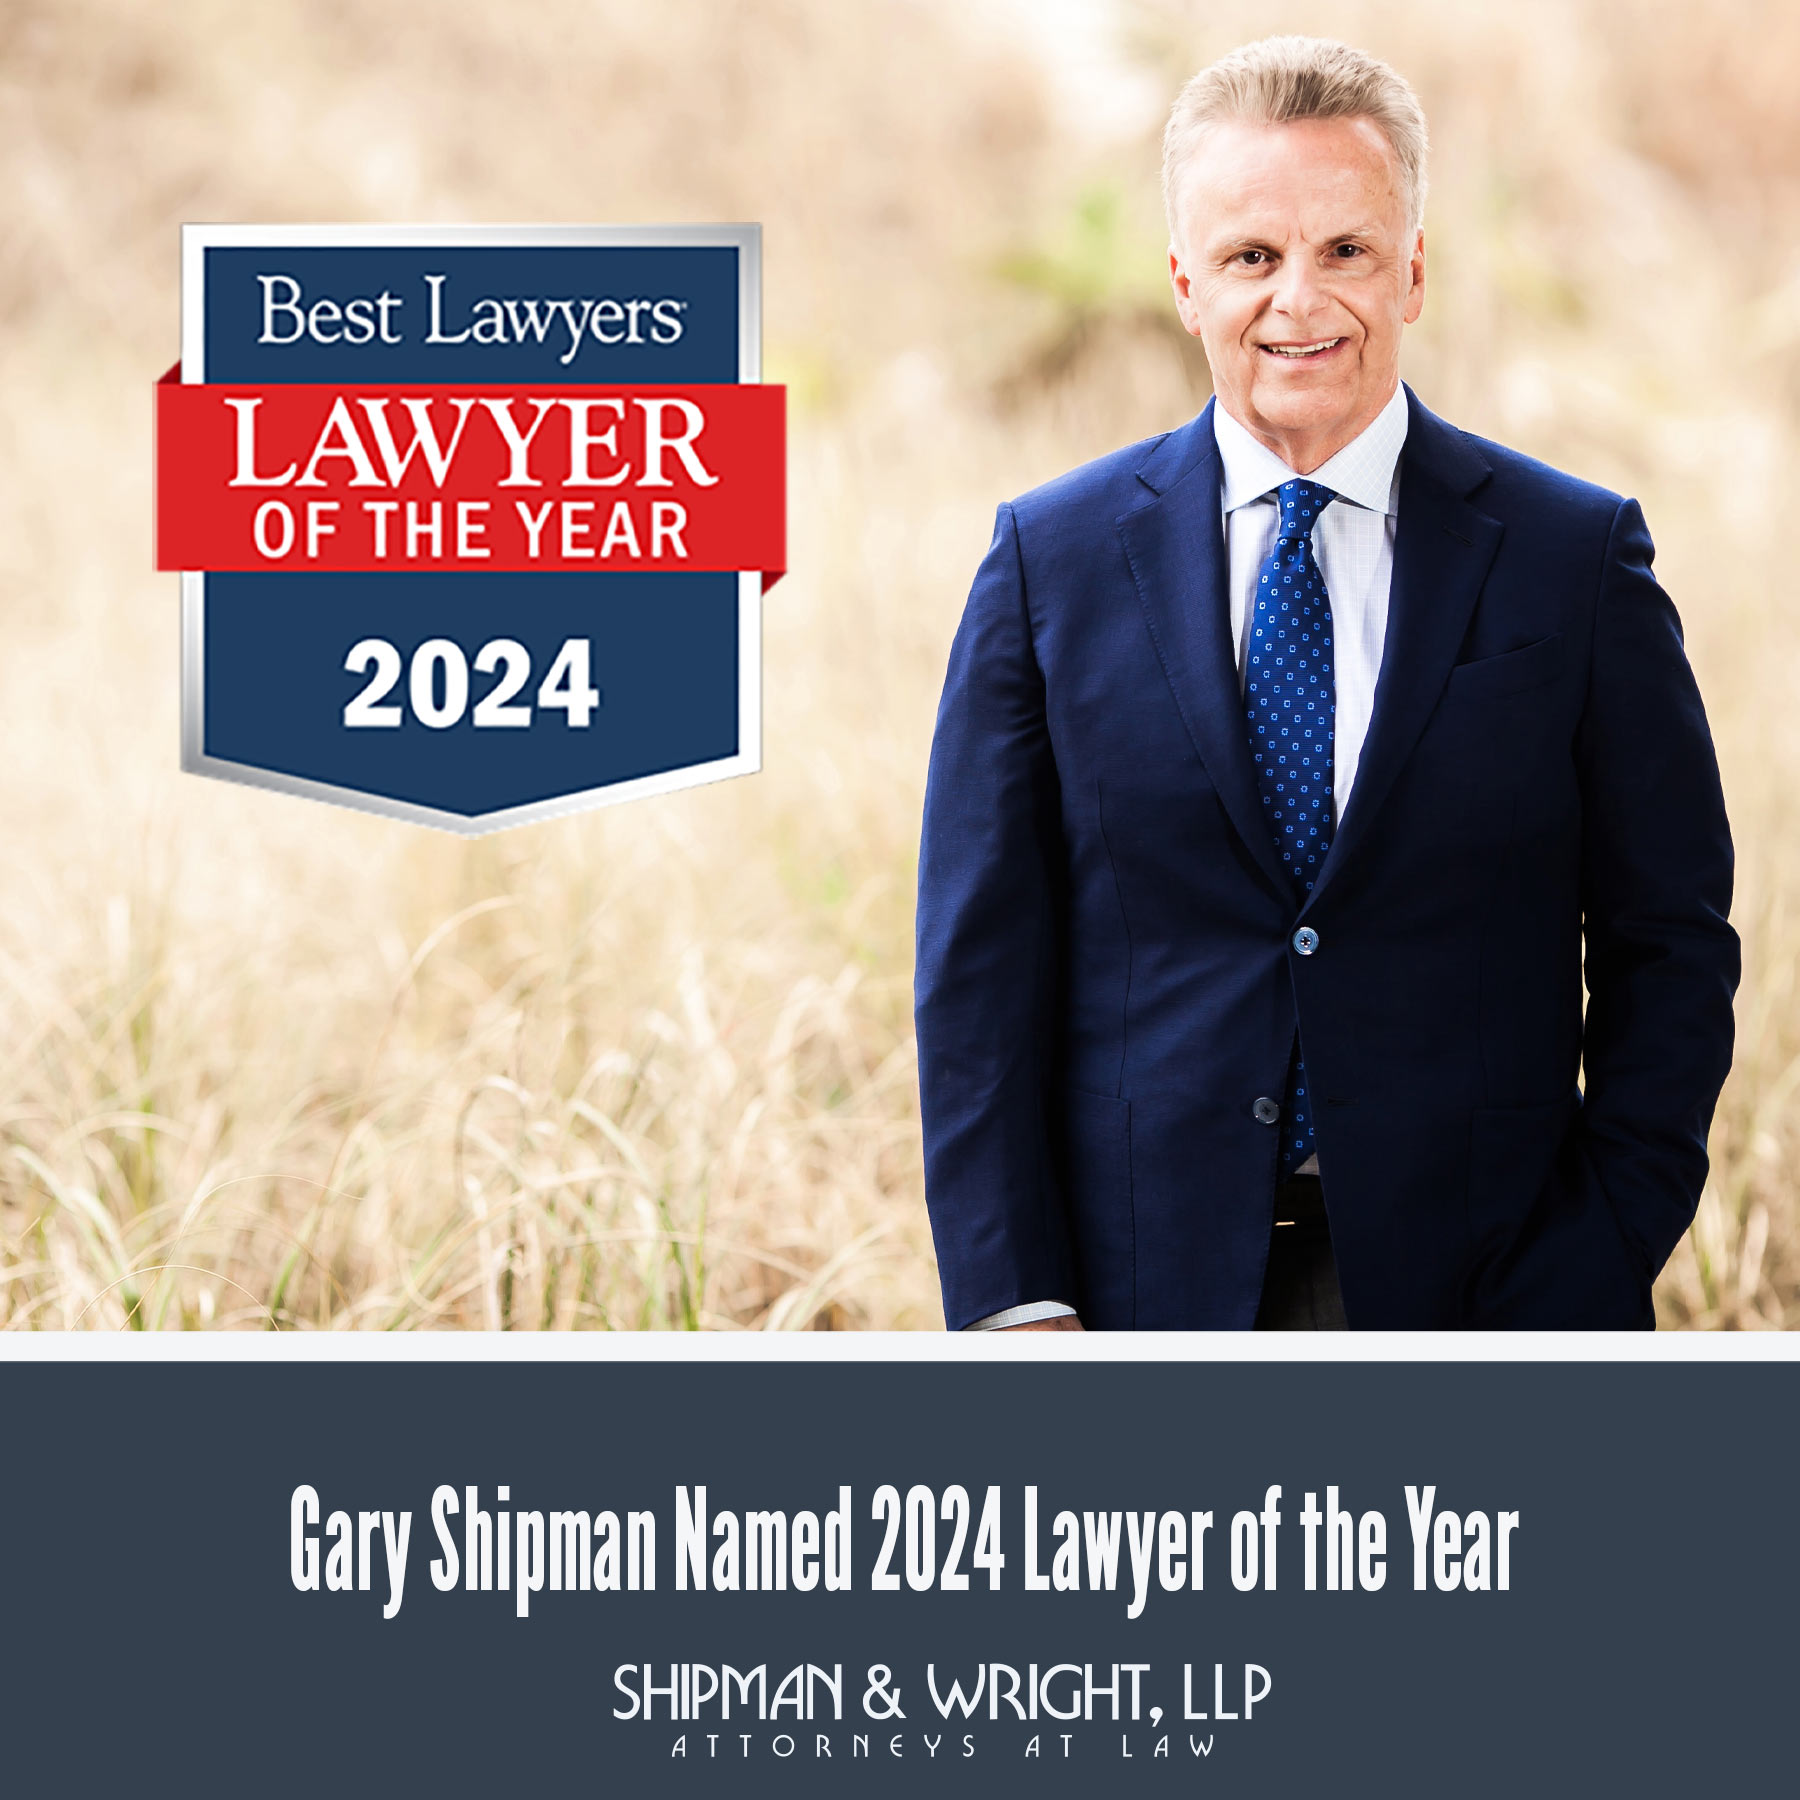 Gary Shipman Named 2024 Lawyer of The Year